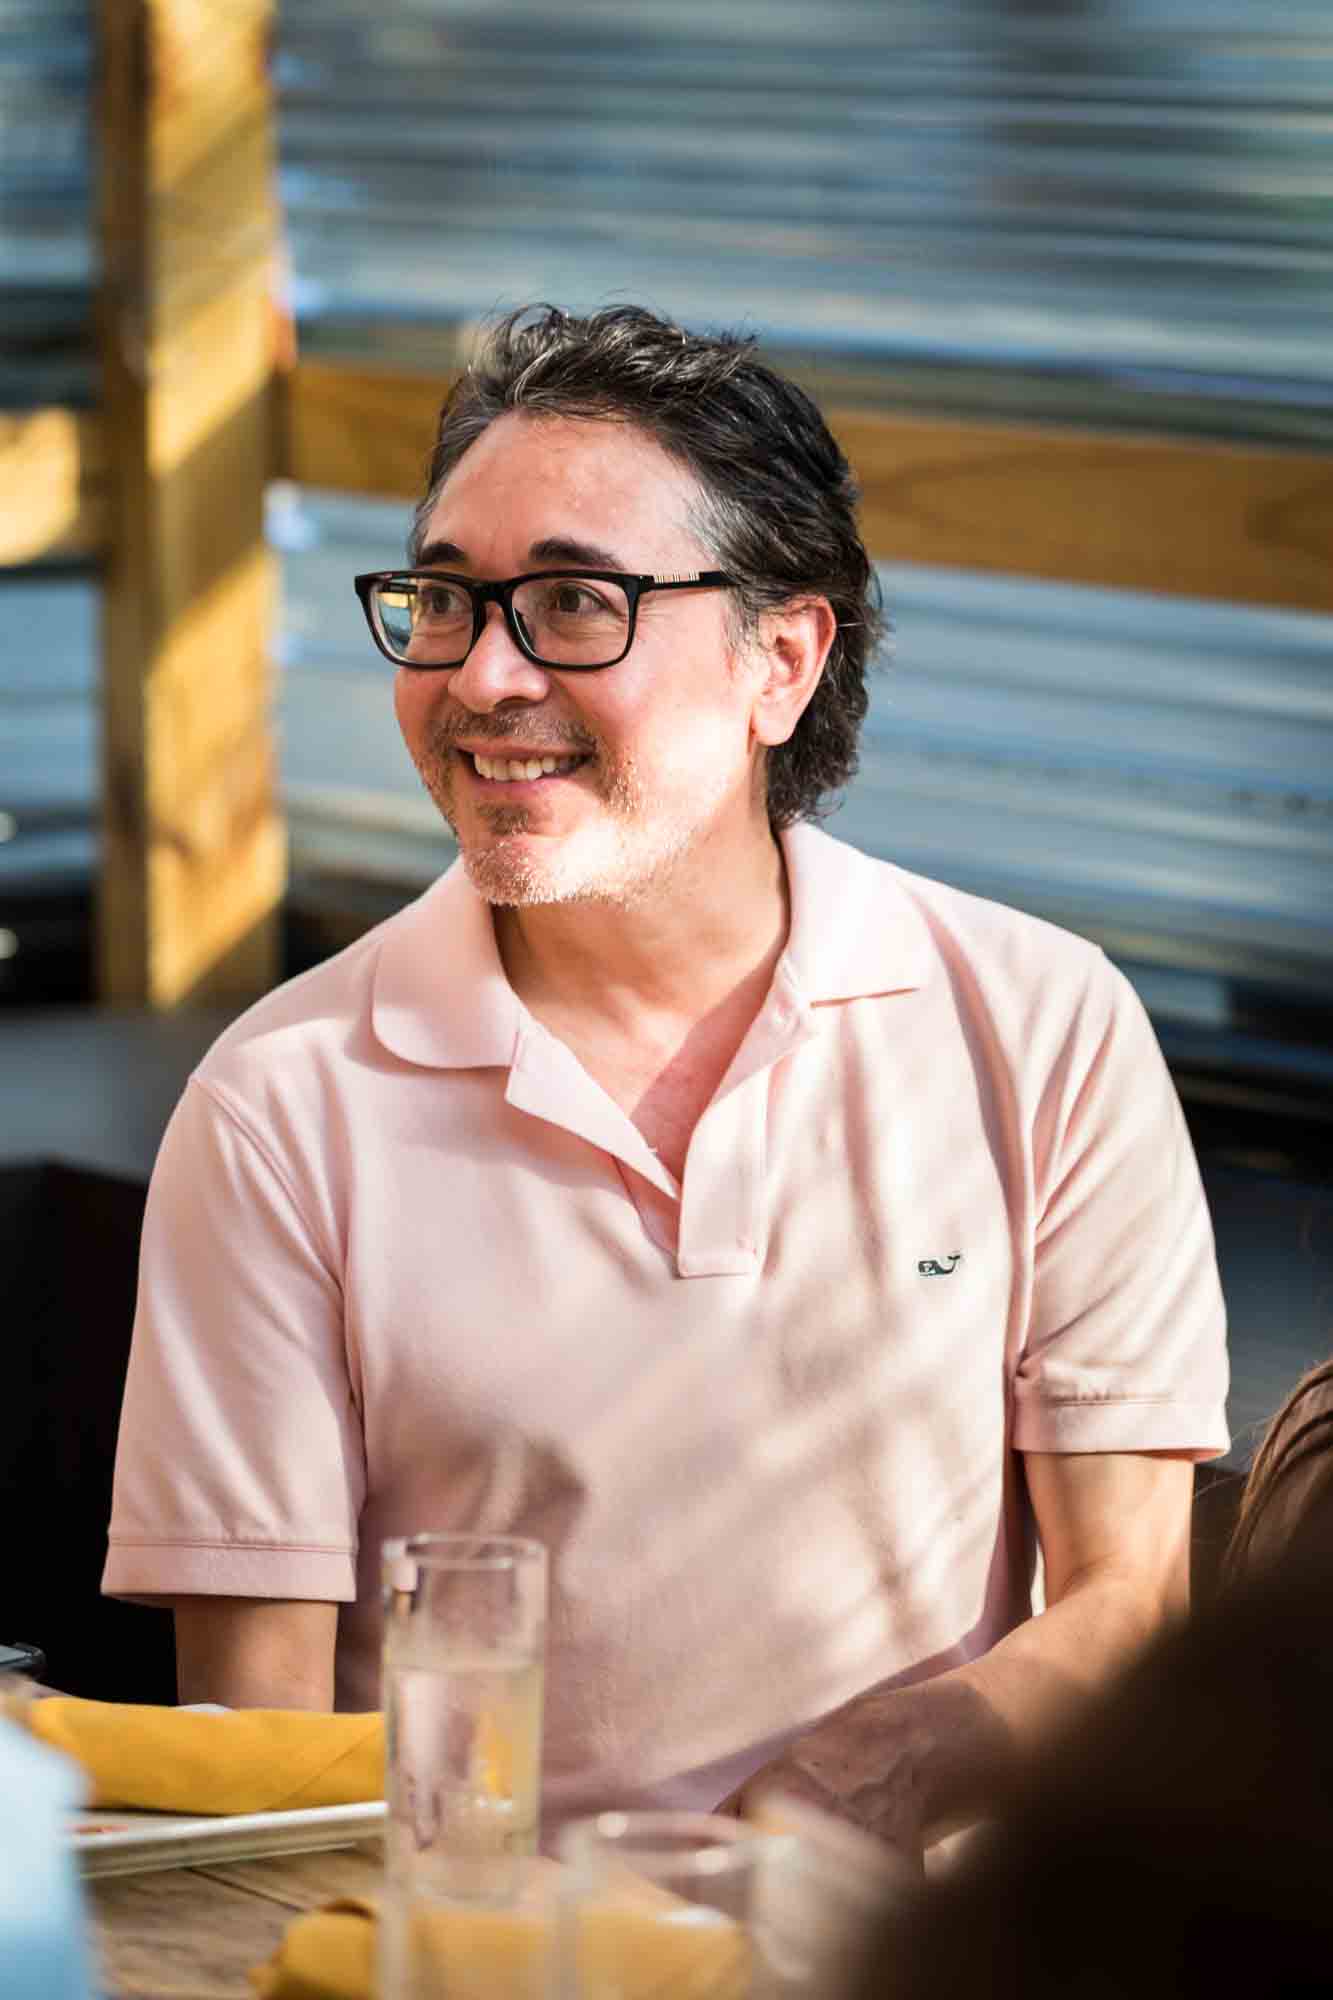 Man wearing glasses and pink shirt during rehearsal dinner